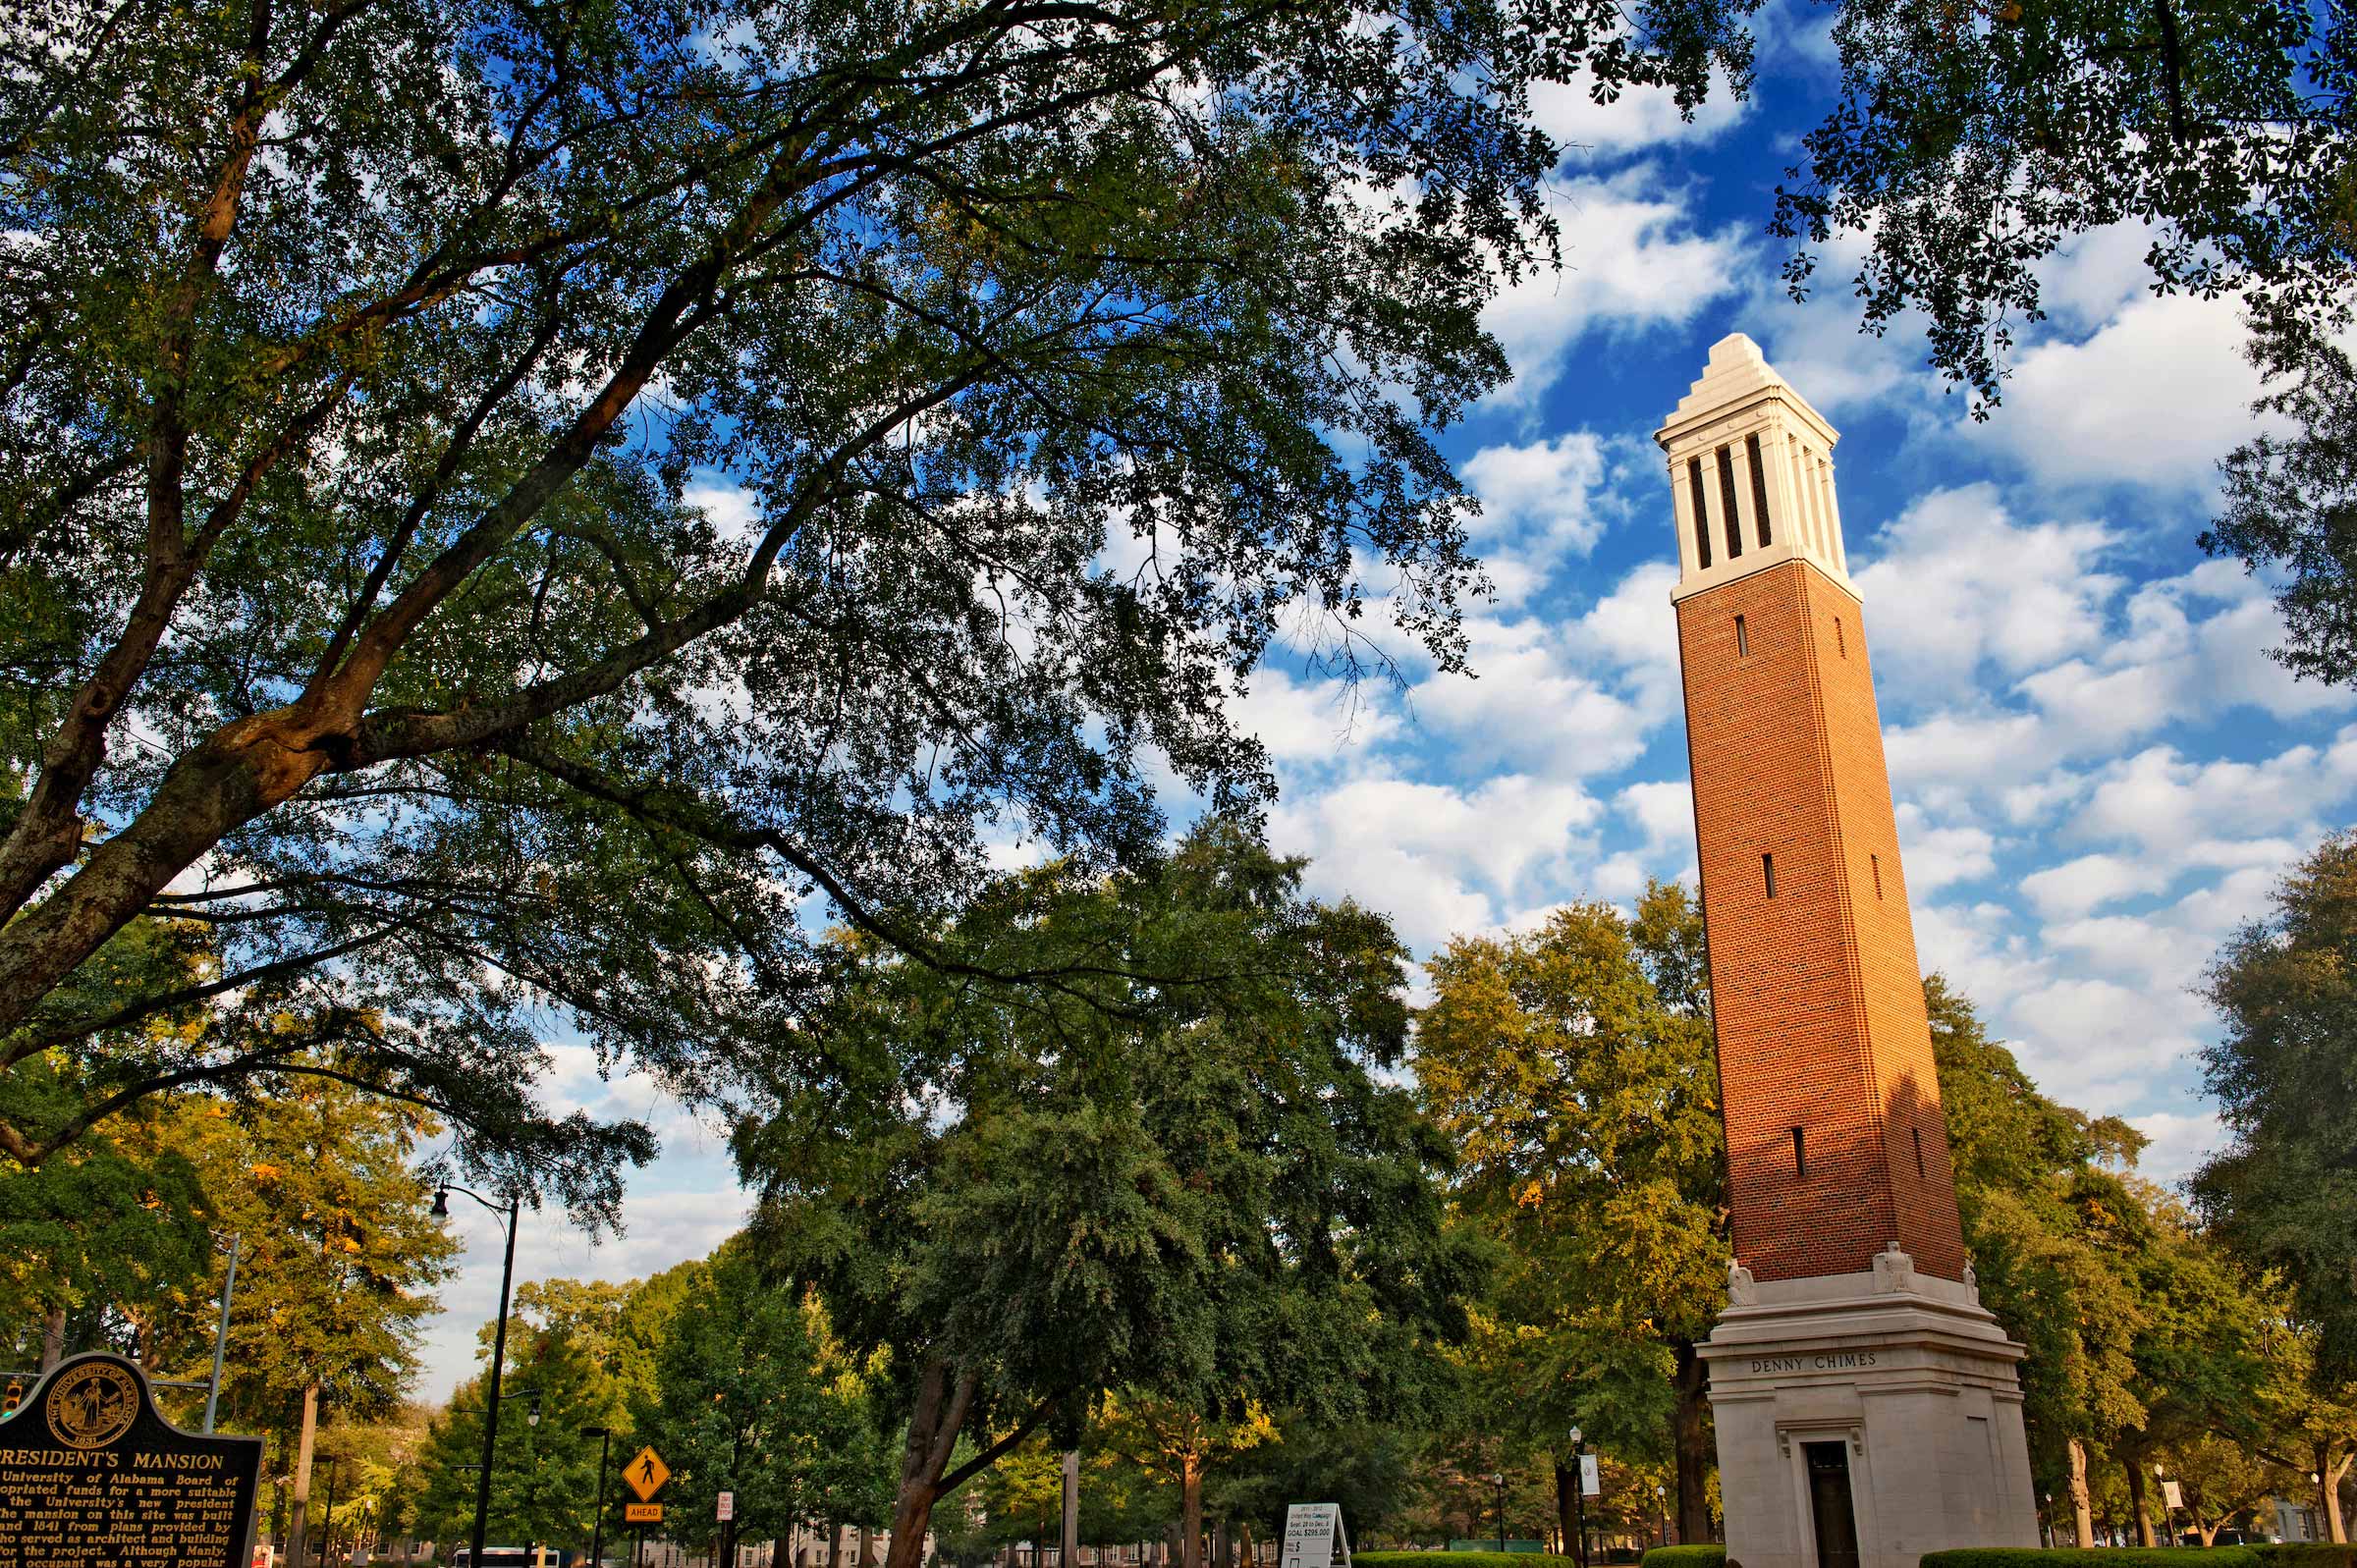 Denny Chimes tower